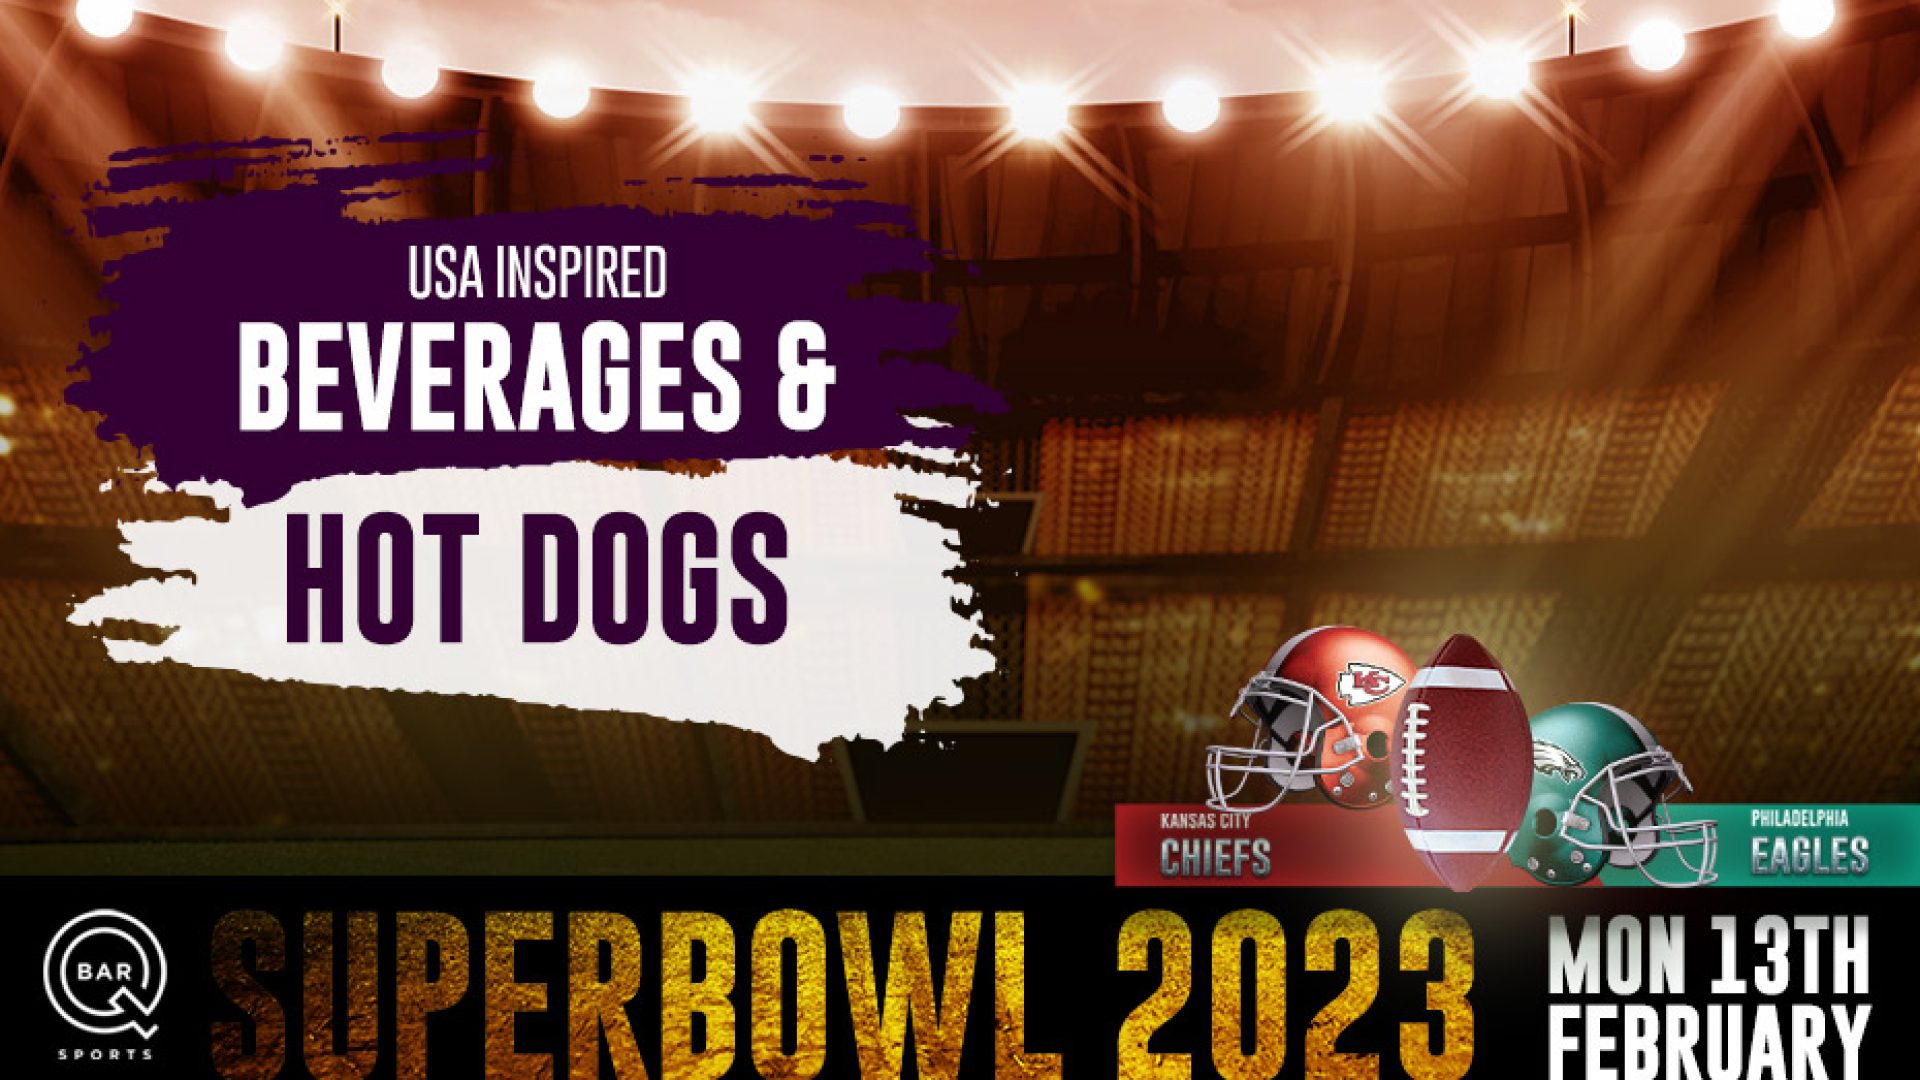 Brothers Leagues Club Super Bowl 2023 Brothers Leagues Club